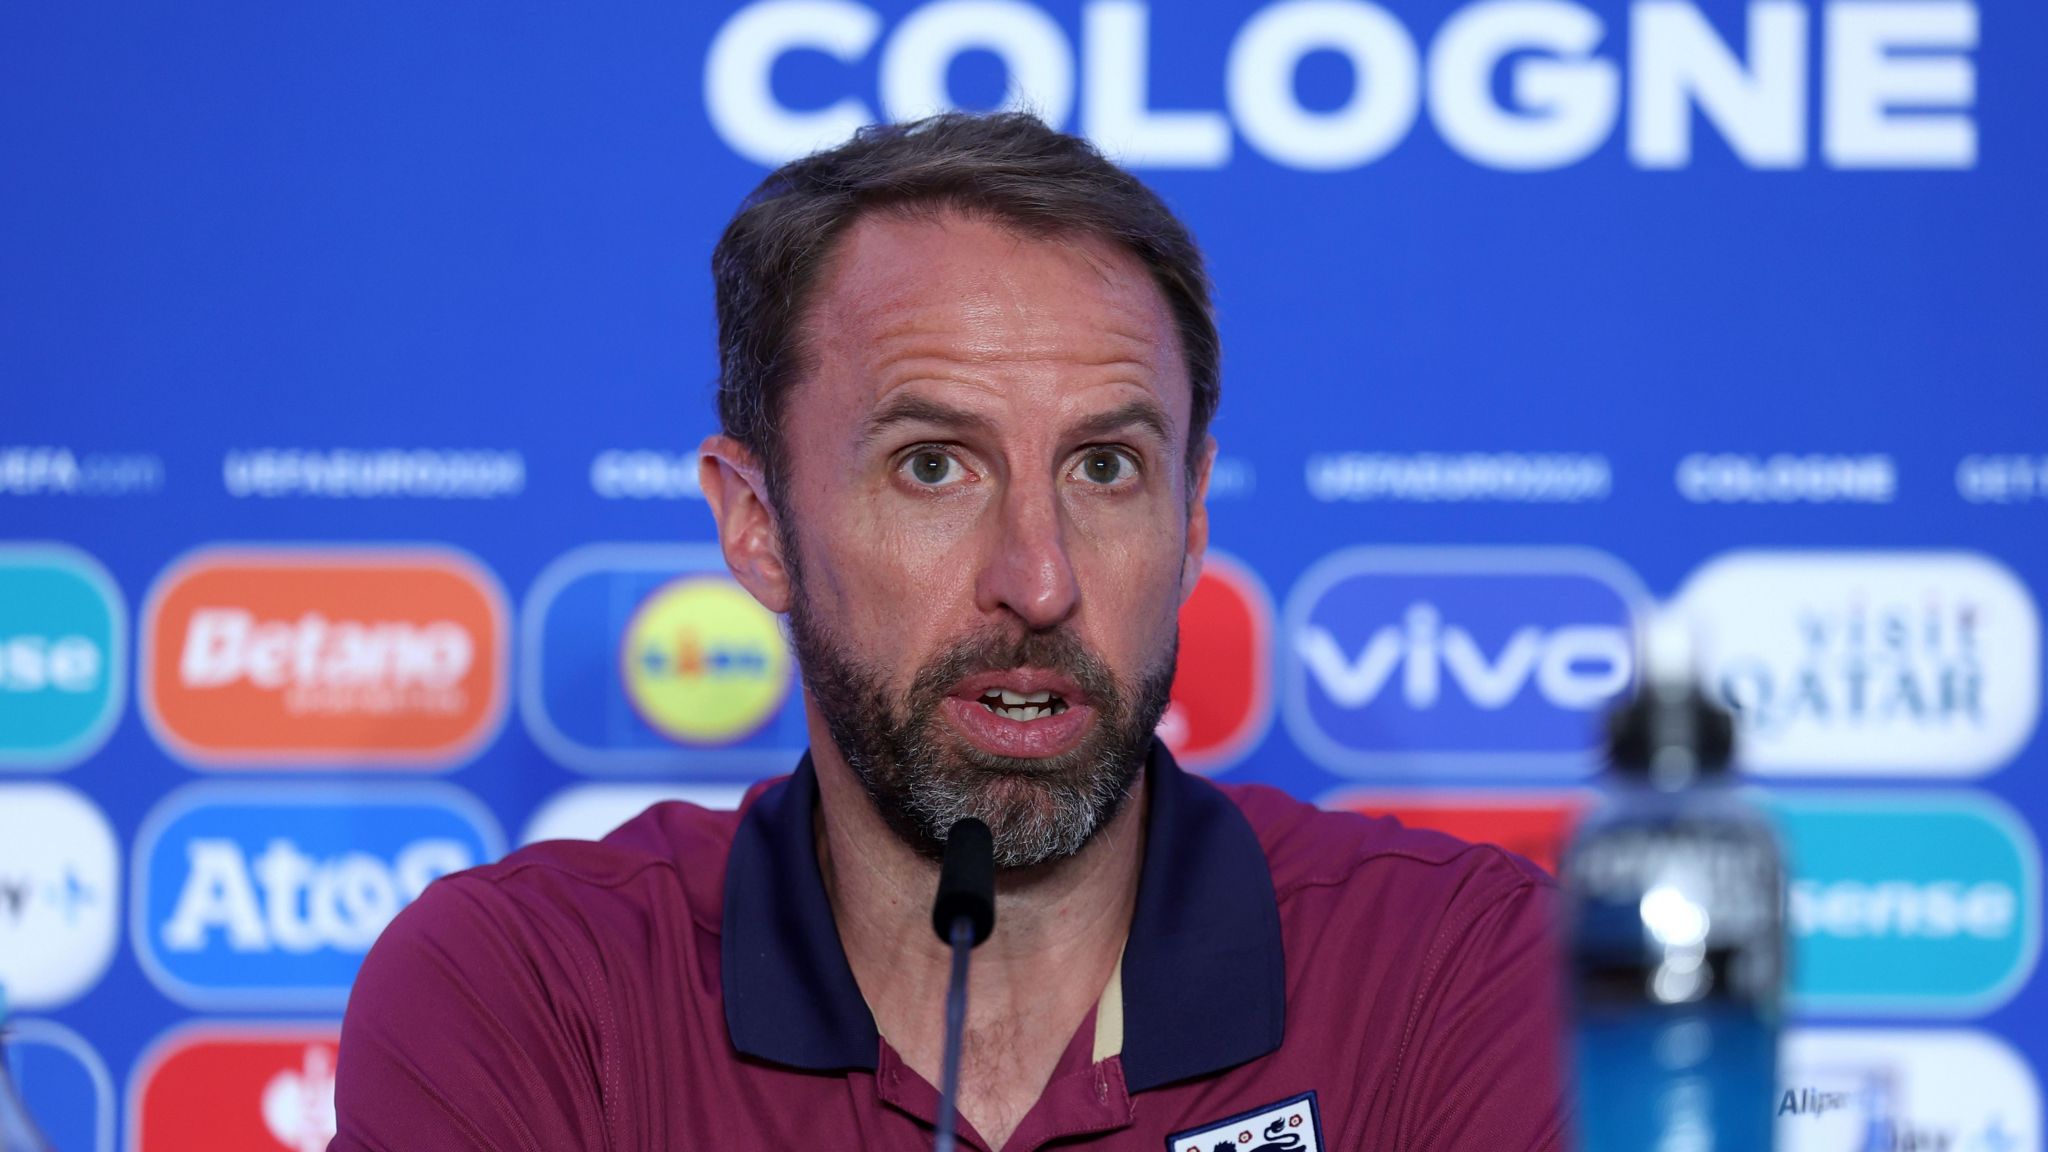 Gareth Southgate speaking at a news conference